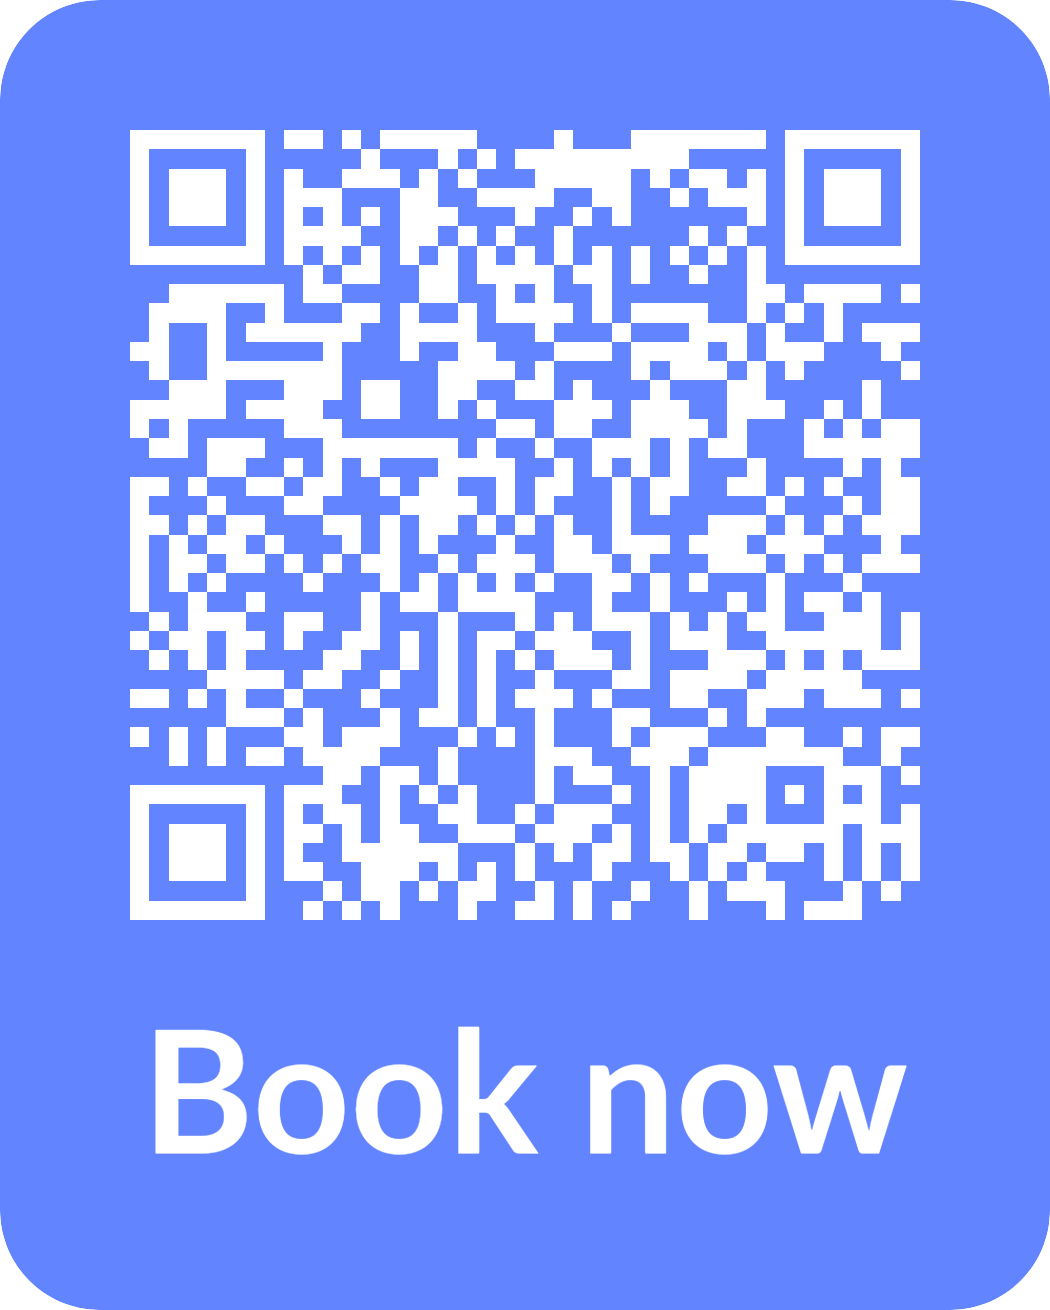 Malham Smithy blacksmiths course bookings page QR code link